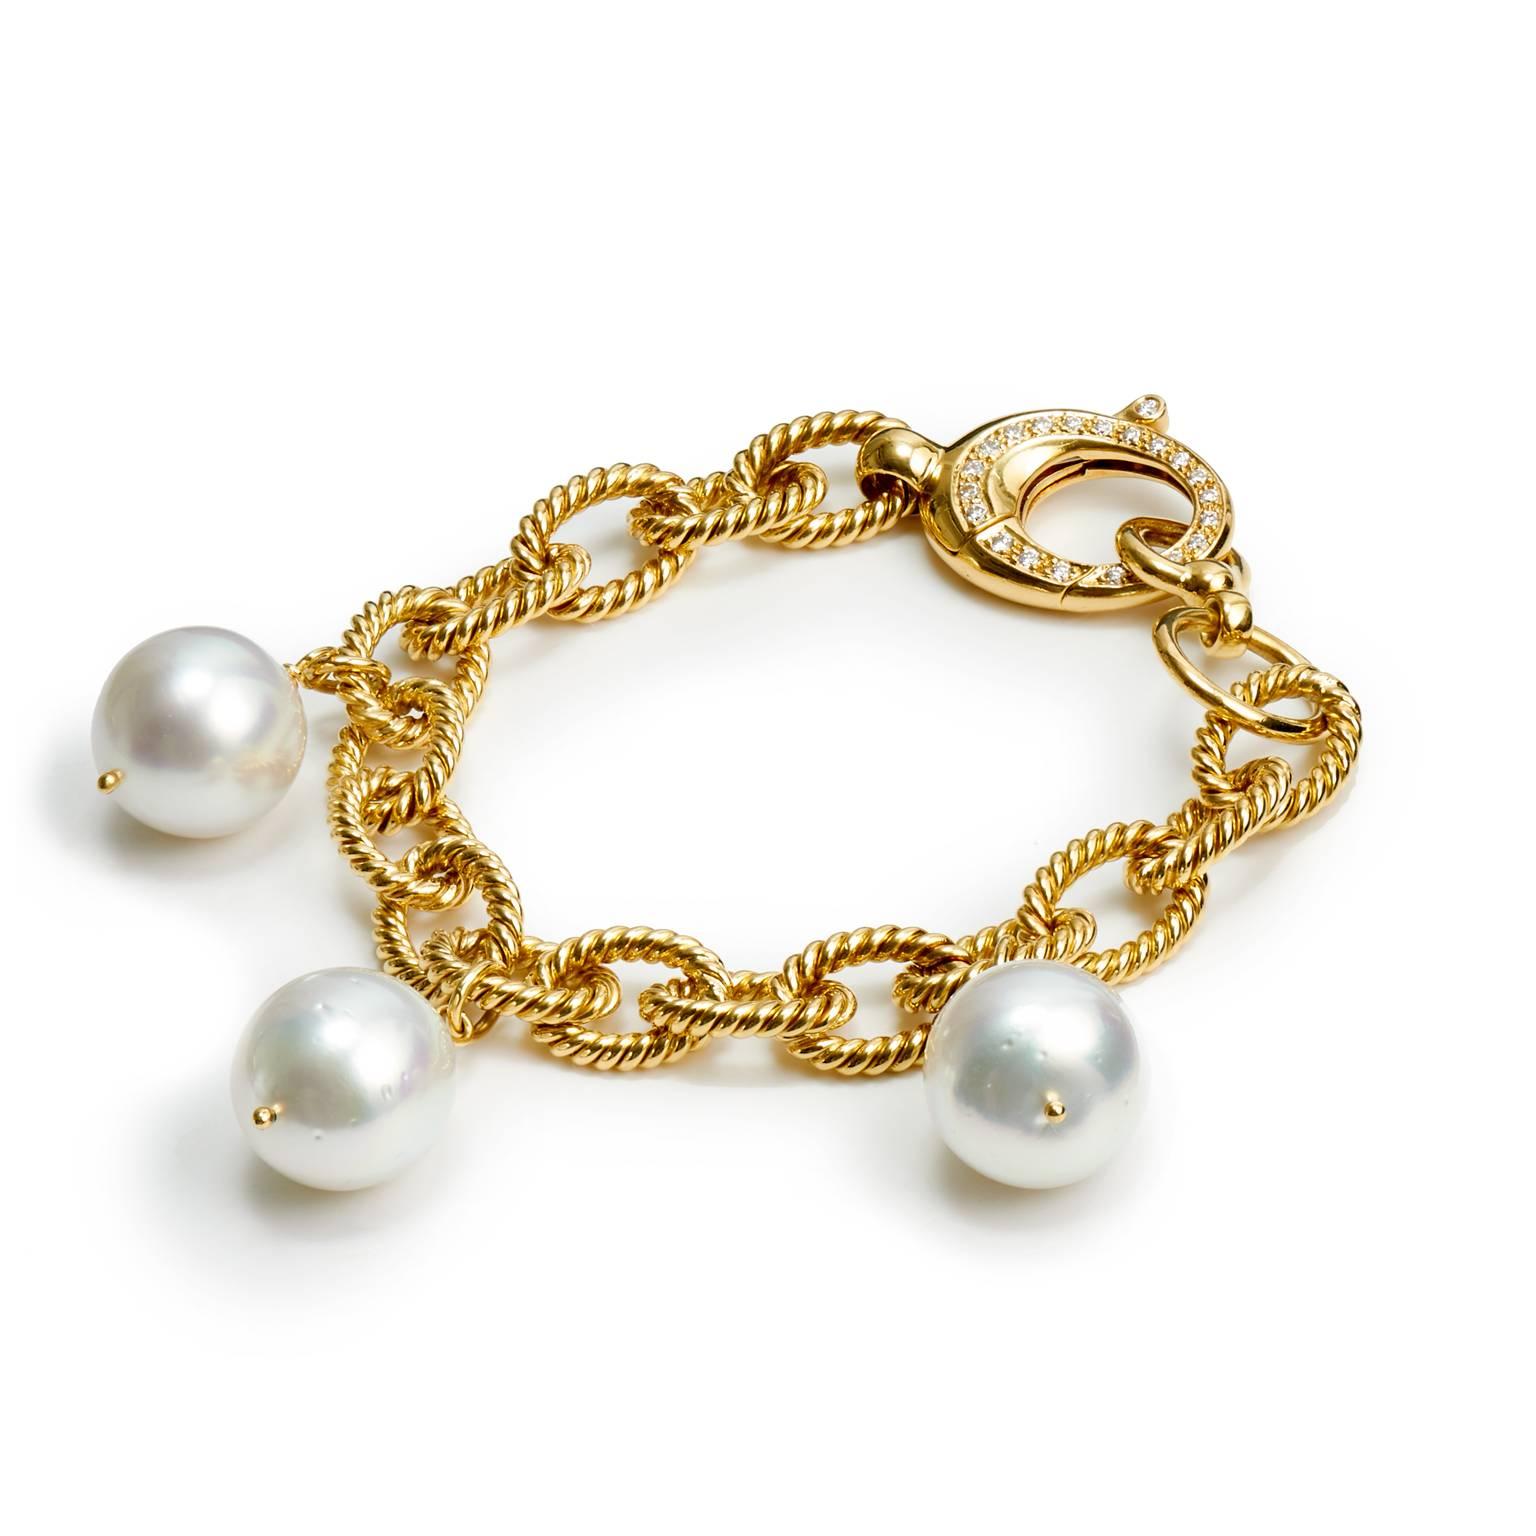 18 karat yellow gold bracelet with a rope-like appearance interlacing knots featuring three 14.2 to 13.2 millimeter South Sea pearls with a 0.06 carat diamond clasp.